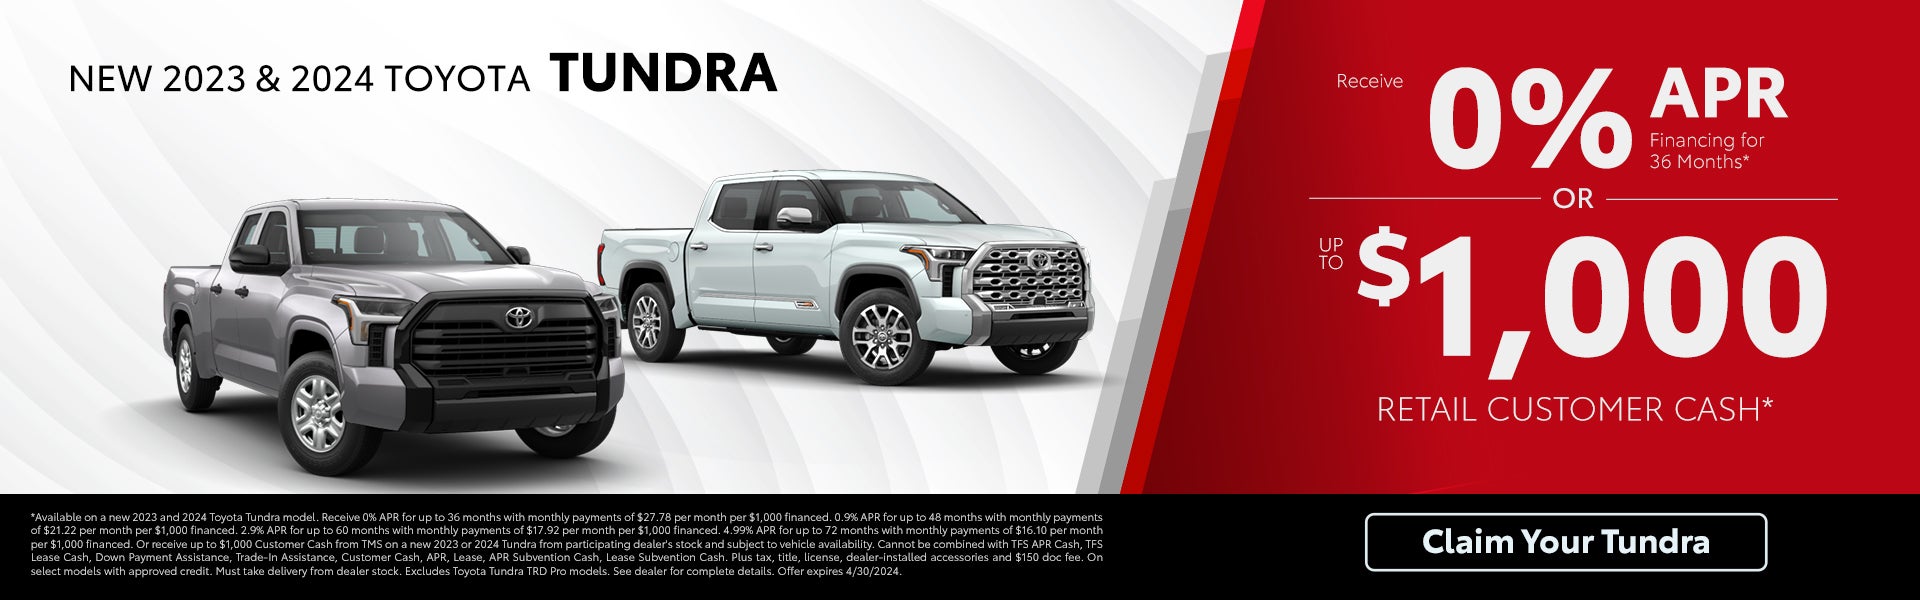 New 2023 and 2024 Toyota Tundra APR Offer Fort Worth TX 